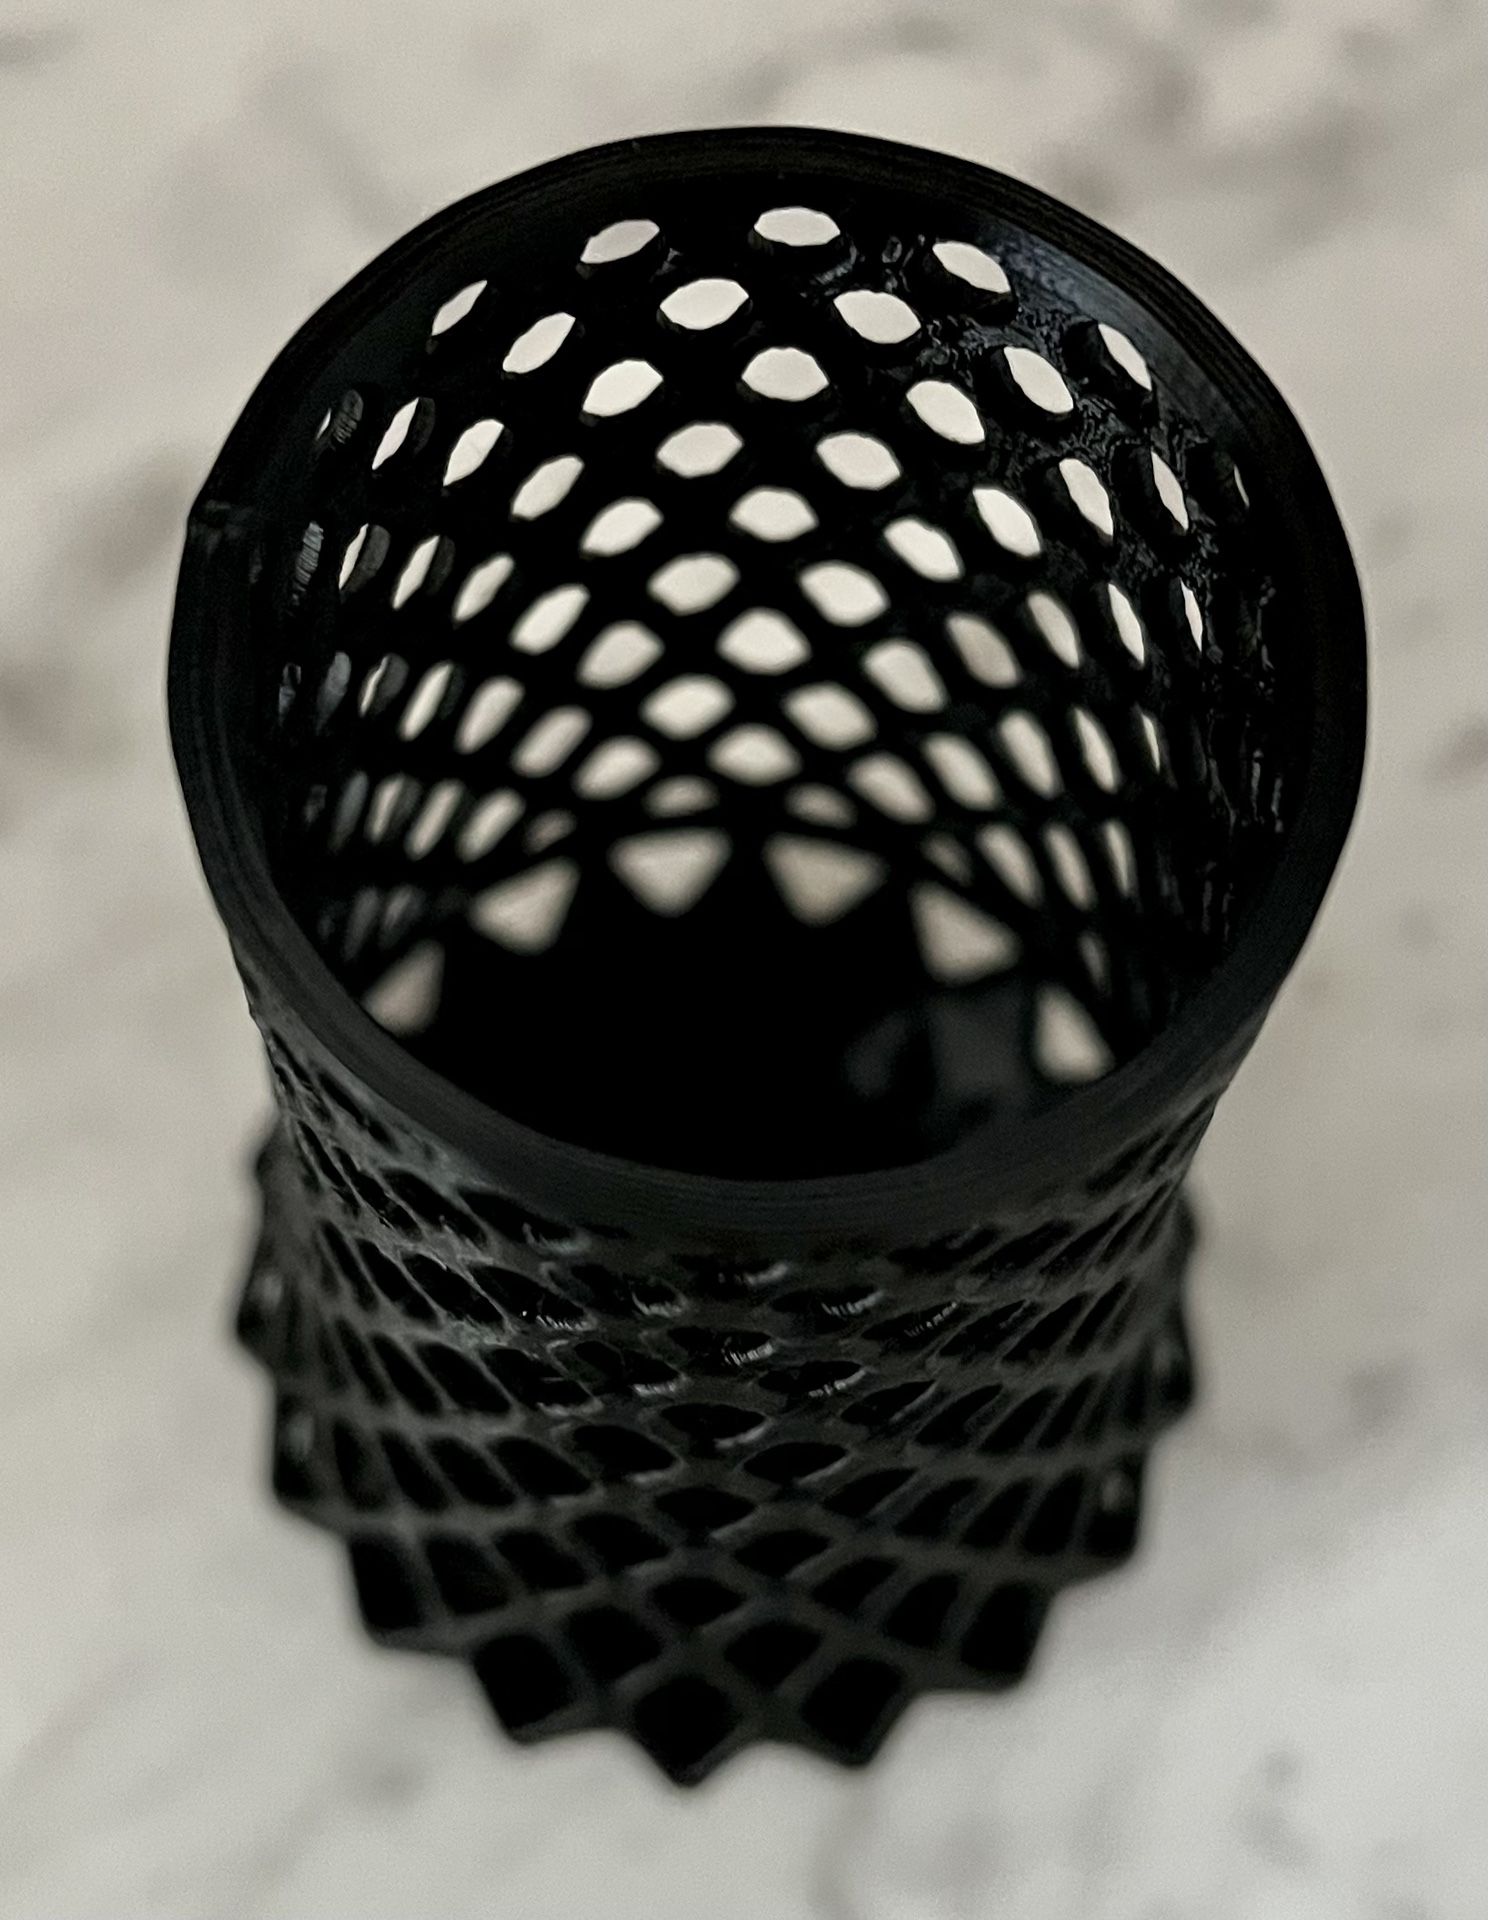 NEW Black 6 Inch Unique Architectural Table Vase for home or office decoration